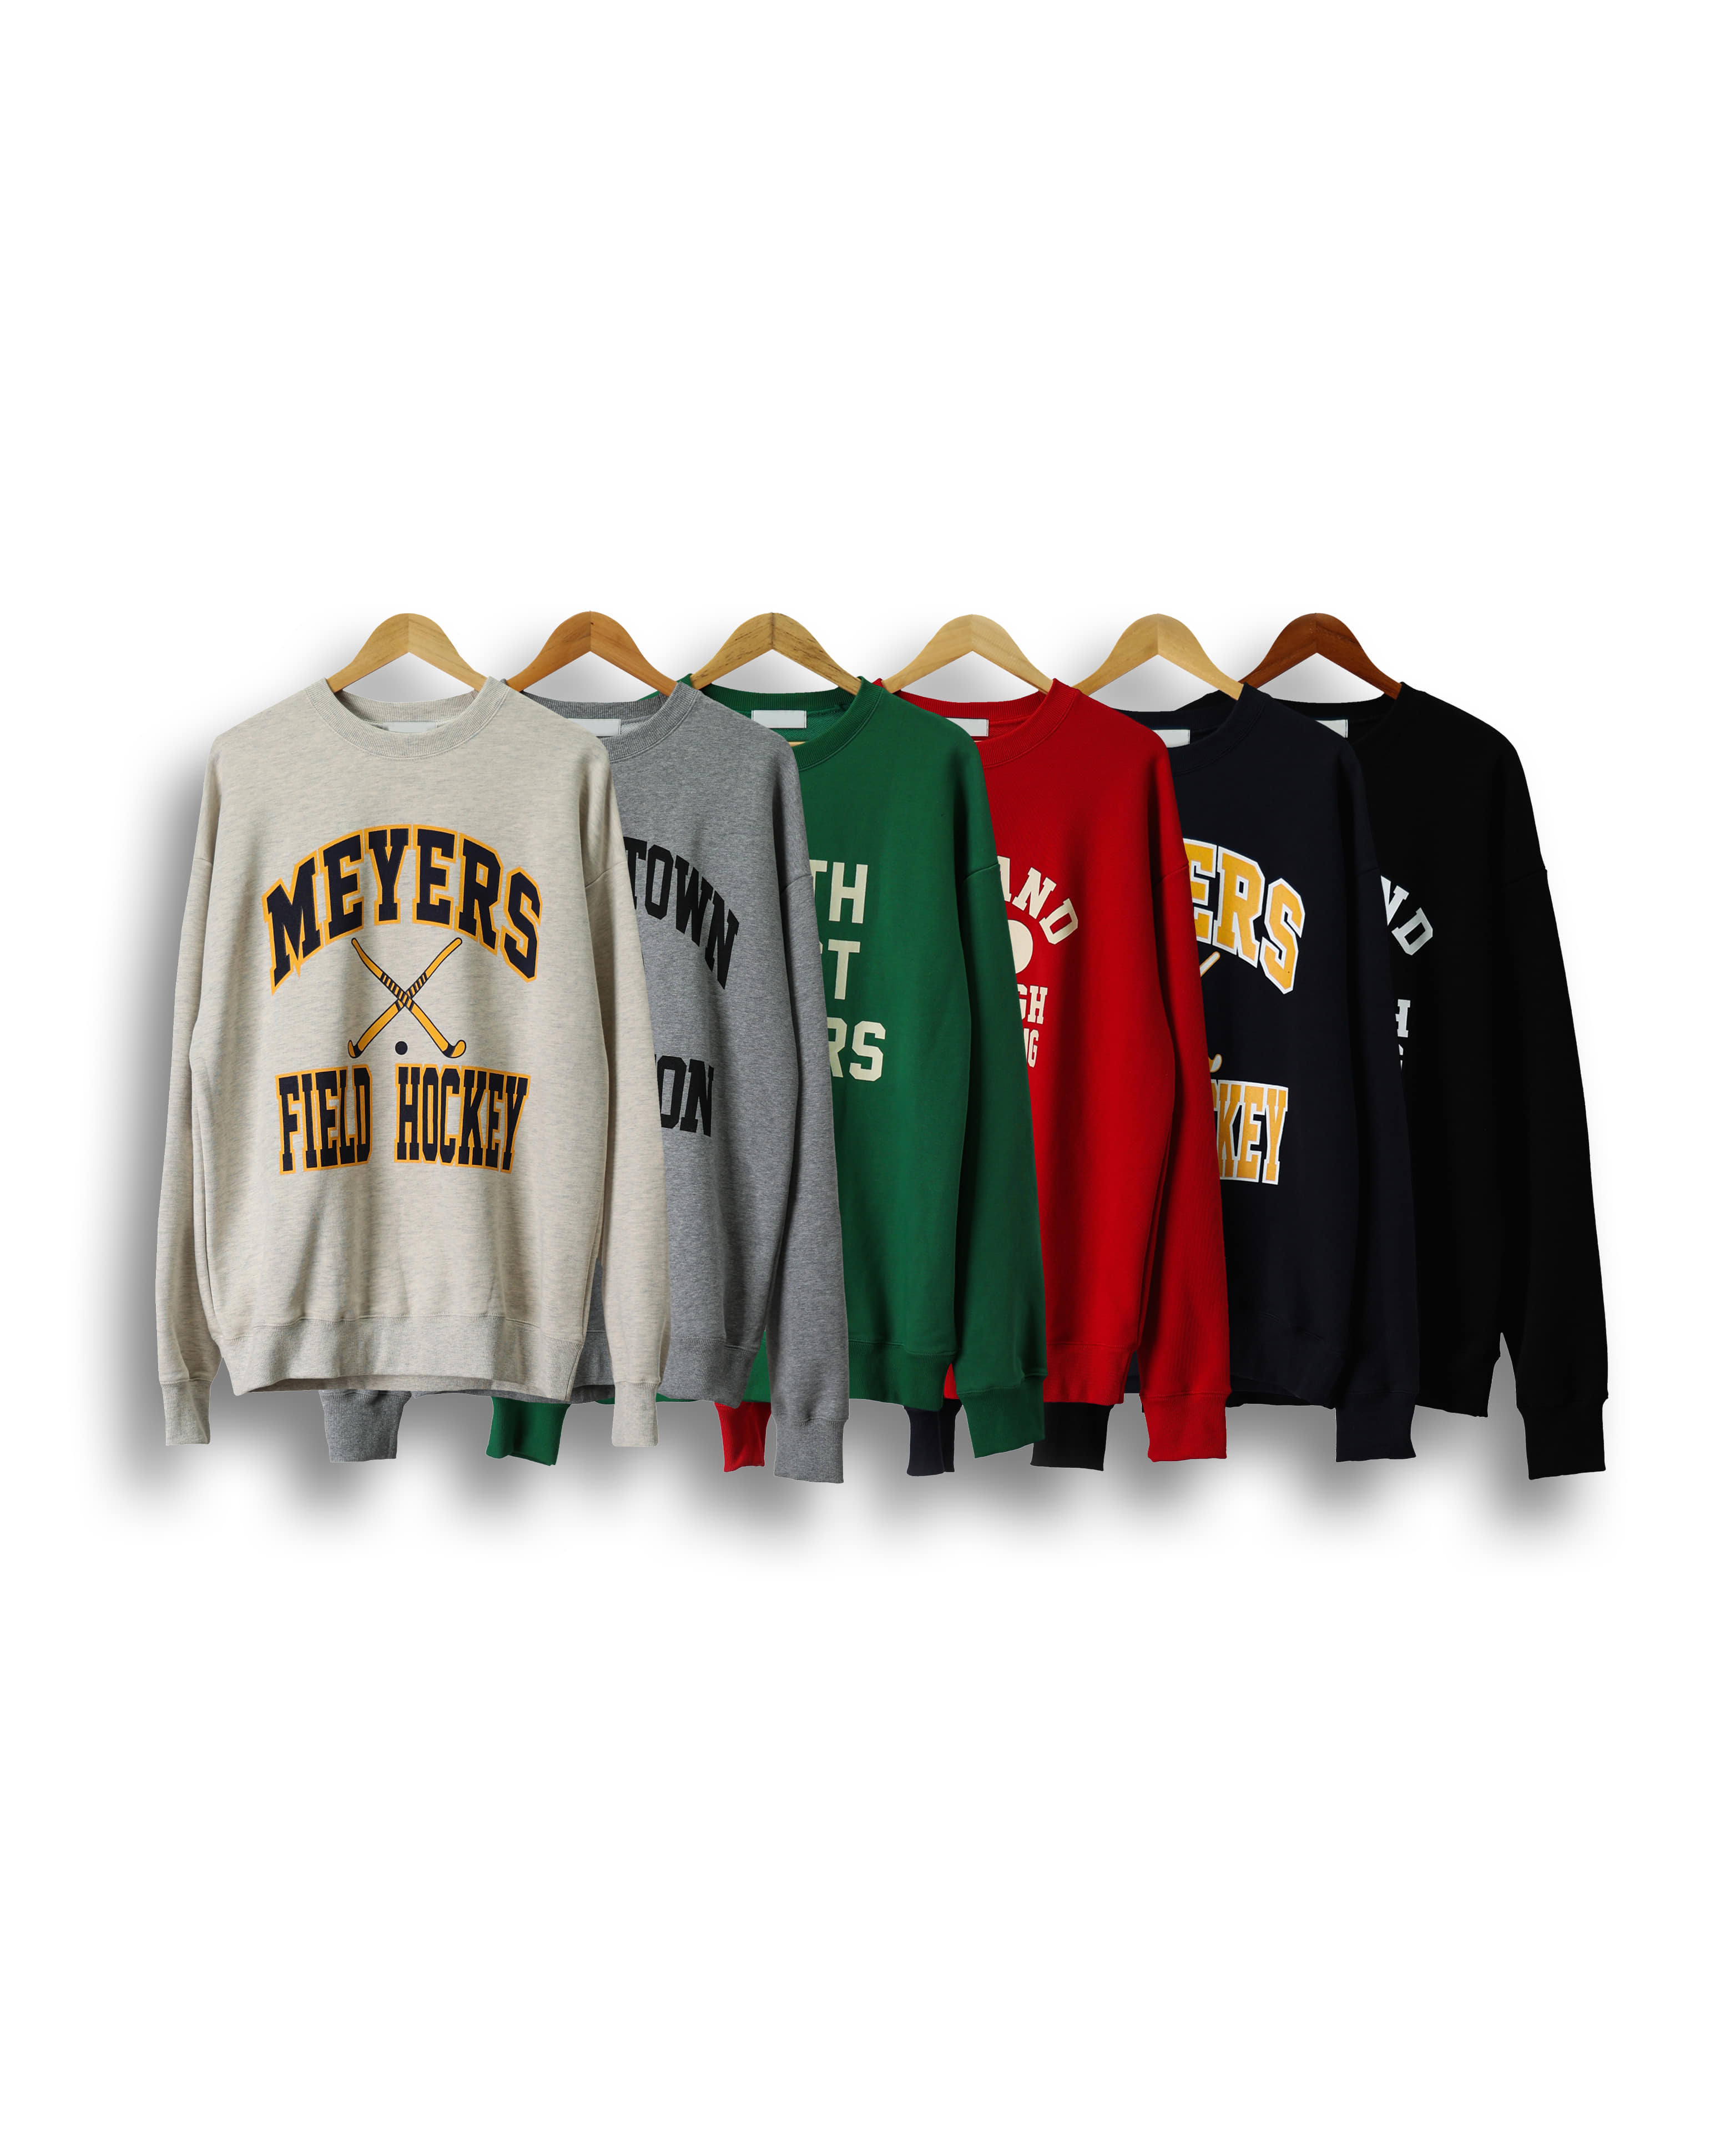 REDDY Casual Printed Sweat Shirts (Black/Navy/Gray/Green/Red/OatMeal)